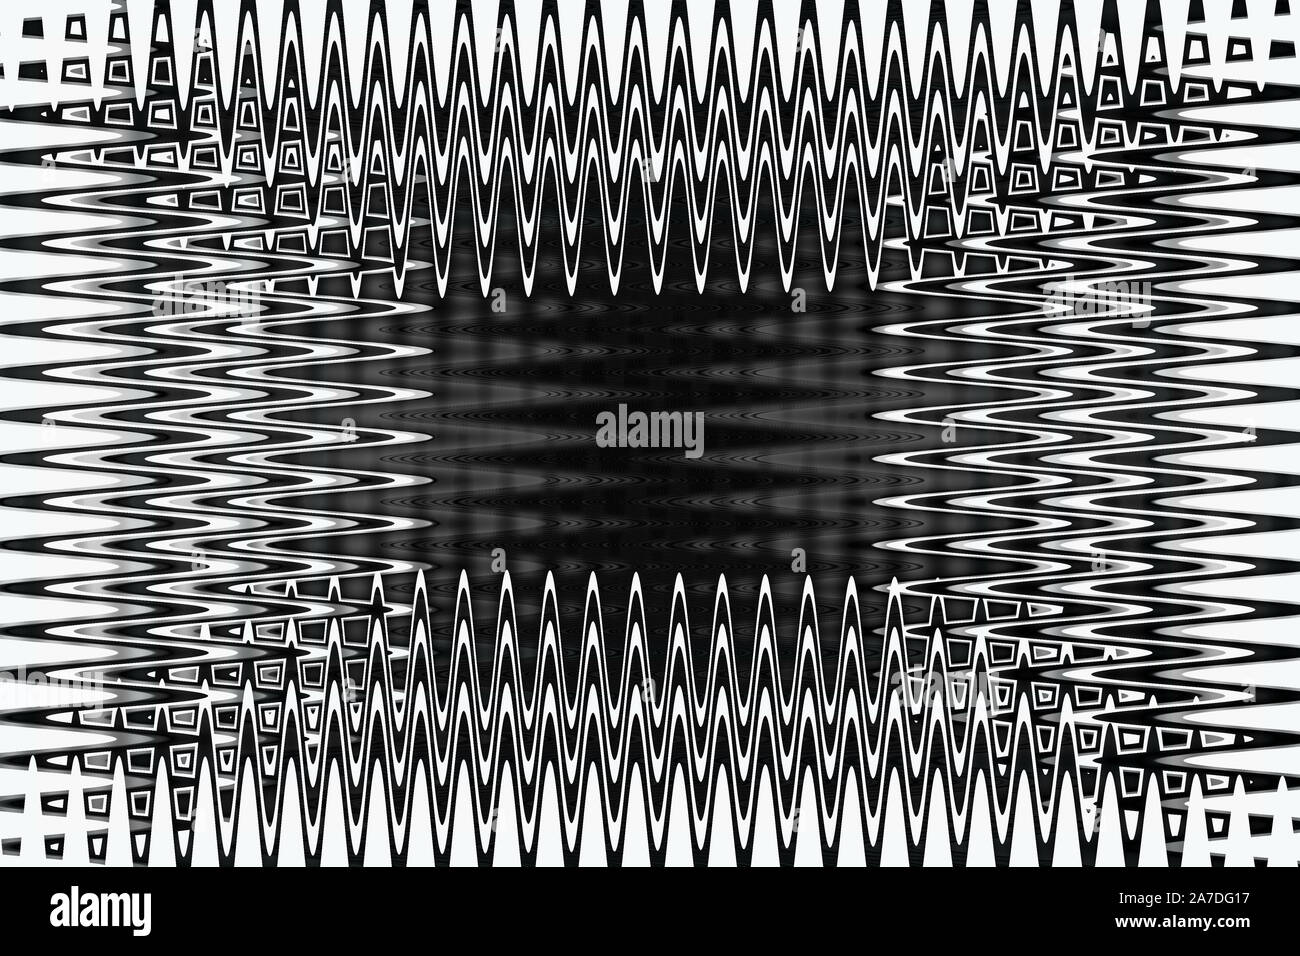 An abstract black and white grunge border background image. Stock Photo